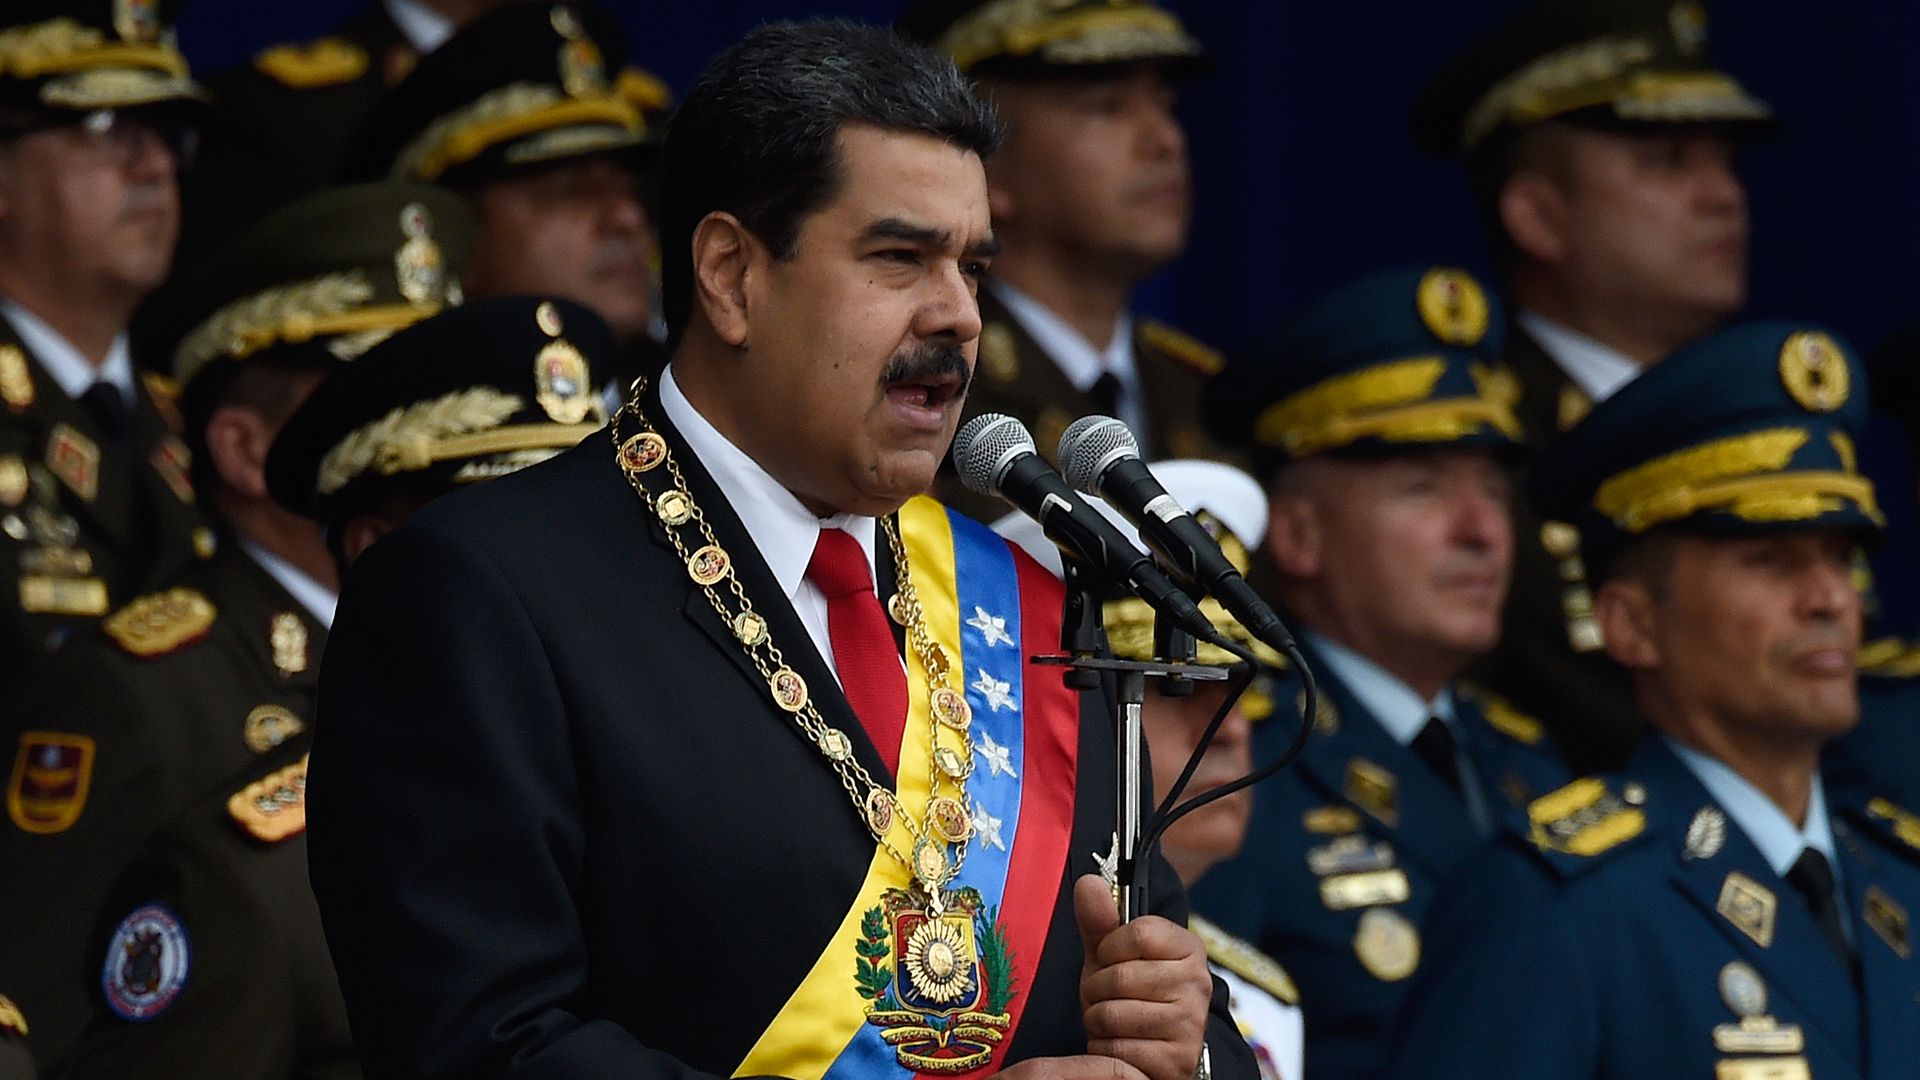 Venezuelan President Nicolas Maduro delivers a speech during a ceremony to celebrate the 81st anniversary of the National Guard in Caracas on August 4, 2018.